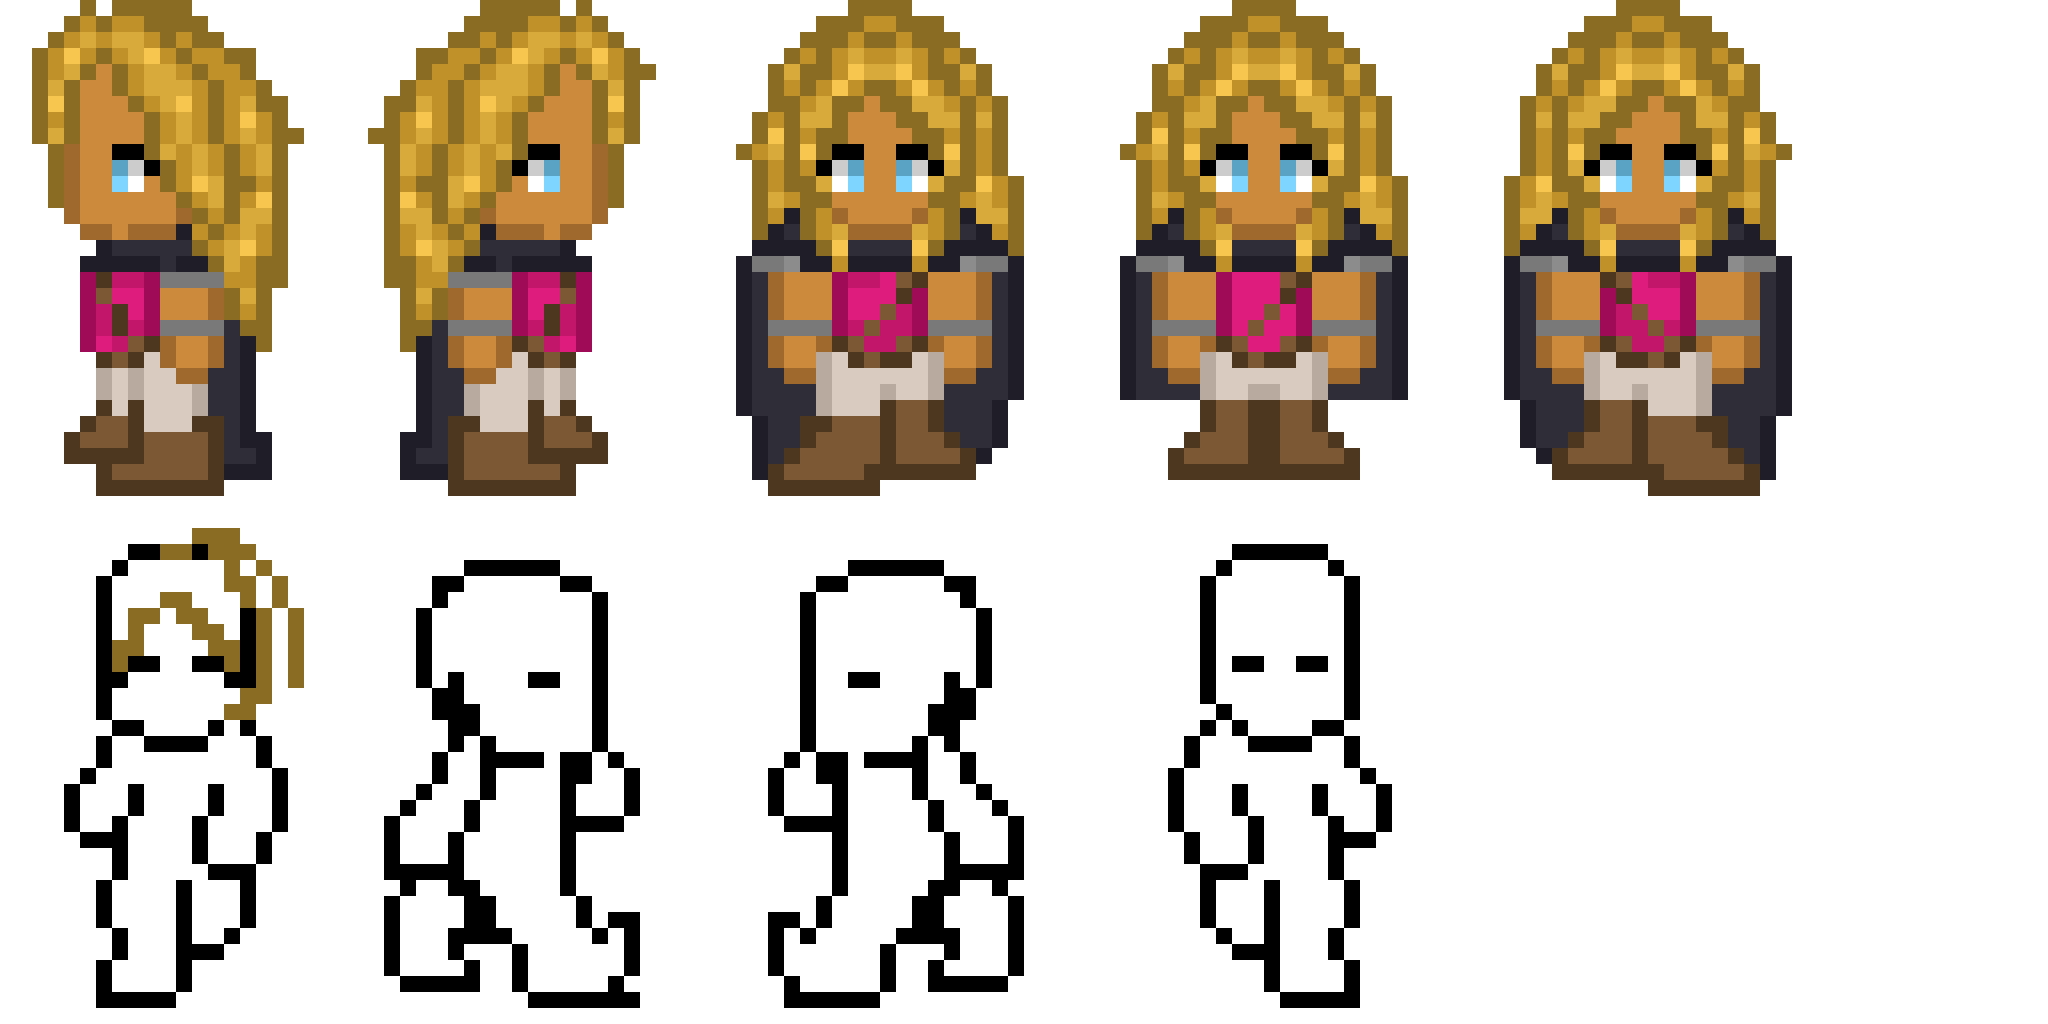 glace sprite bases (wip)